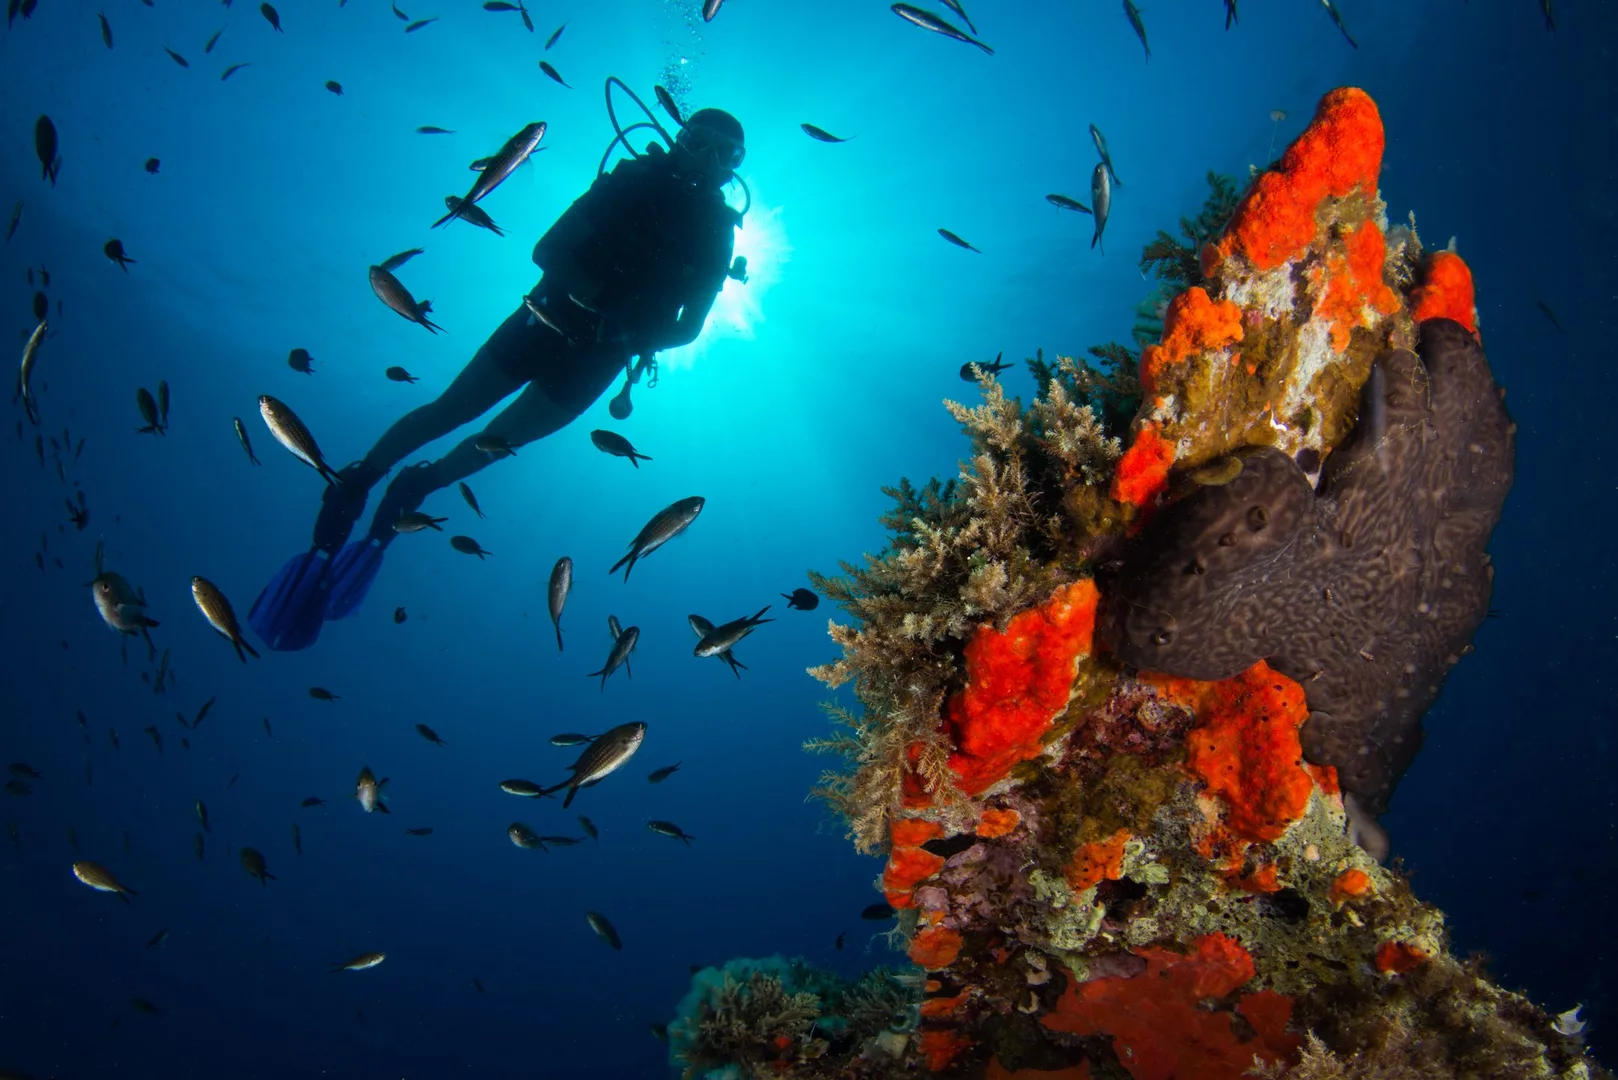 Diver next to a colorful reef decorated with sponges